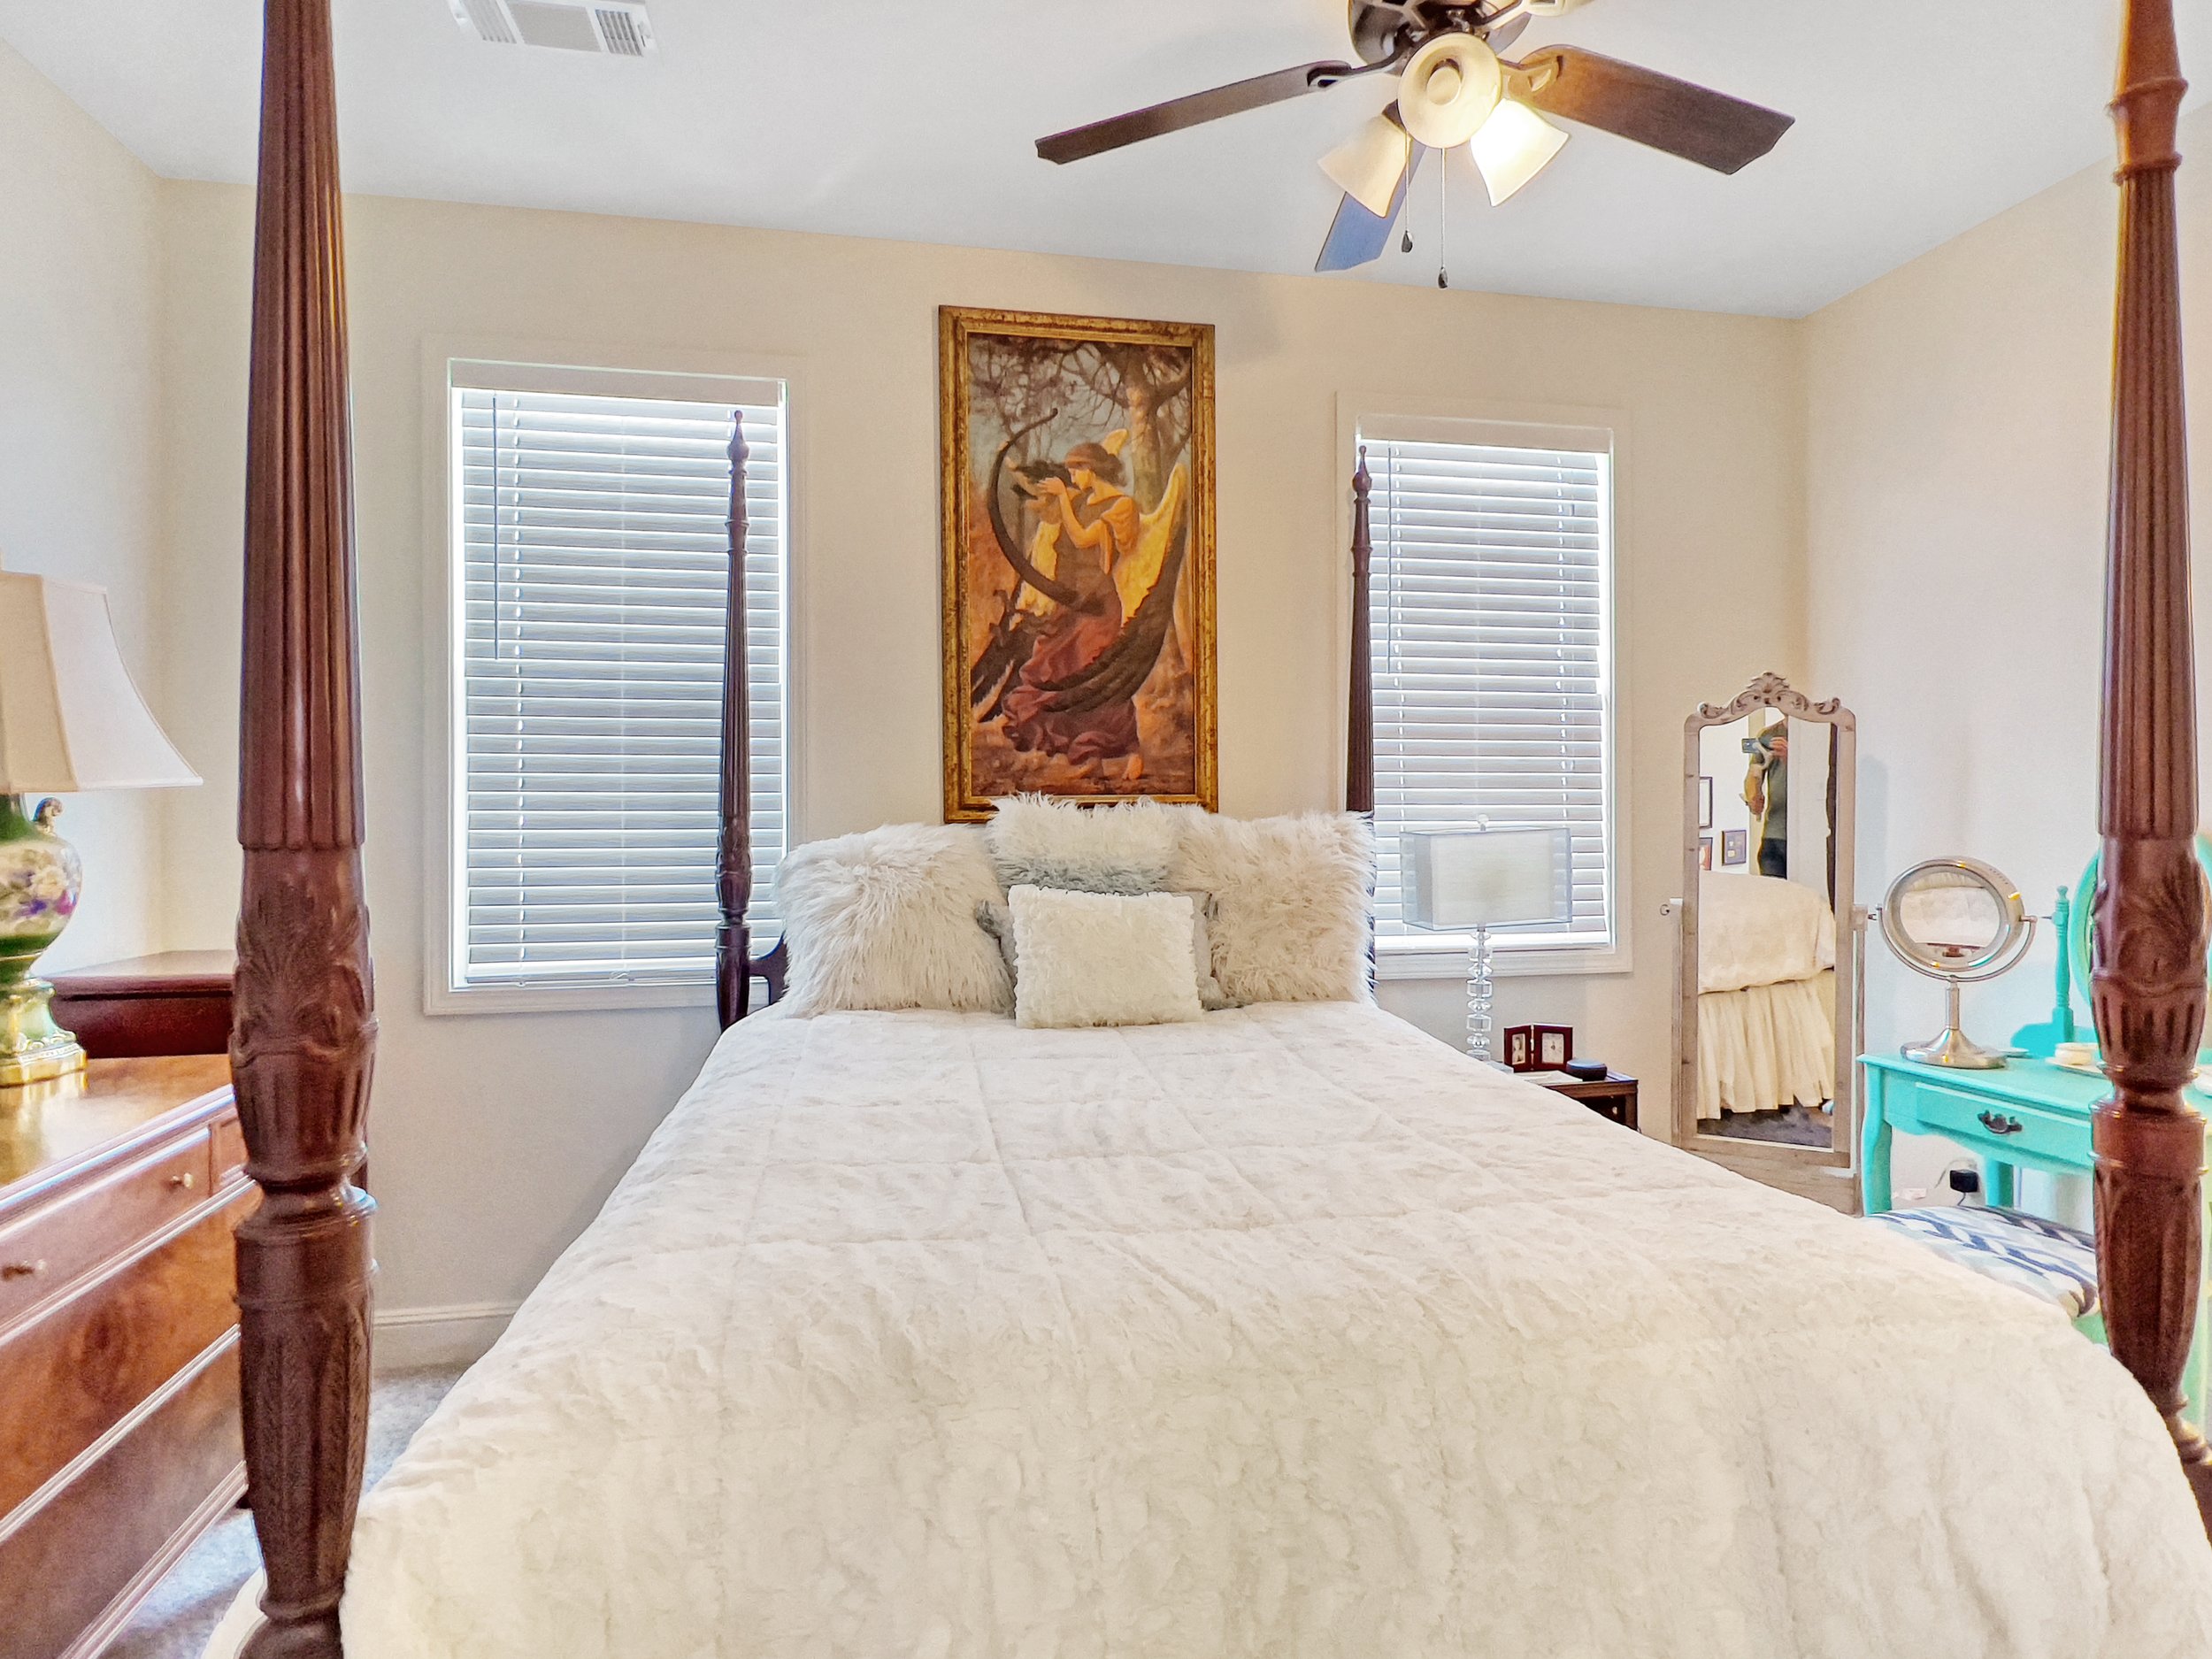 Bedroom | 2 Bedroom 2.5 Bath Townhome | The Cabernet